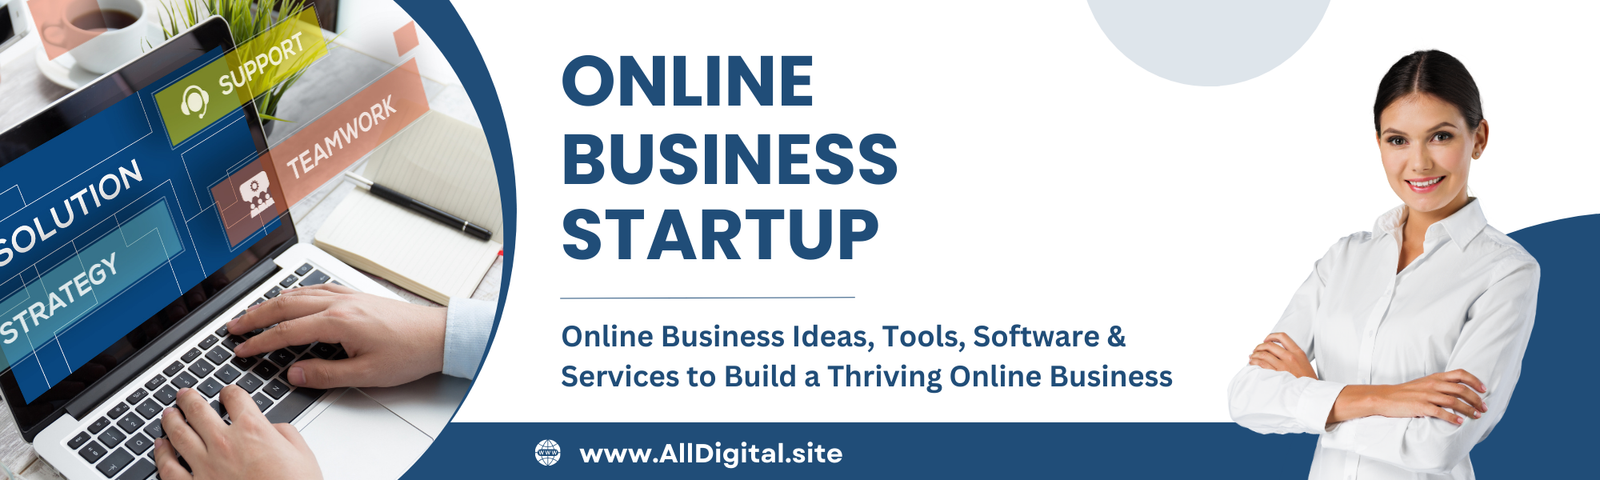 Online Business Startup : Online business ideas, tools, software & services to build a thriving online business. Embark on your entrepreneurial journey with AllDigital.site - Unleash your inner entrepreneur and build a thriving online business